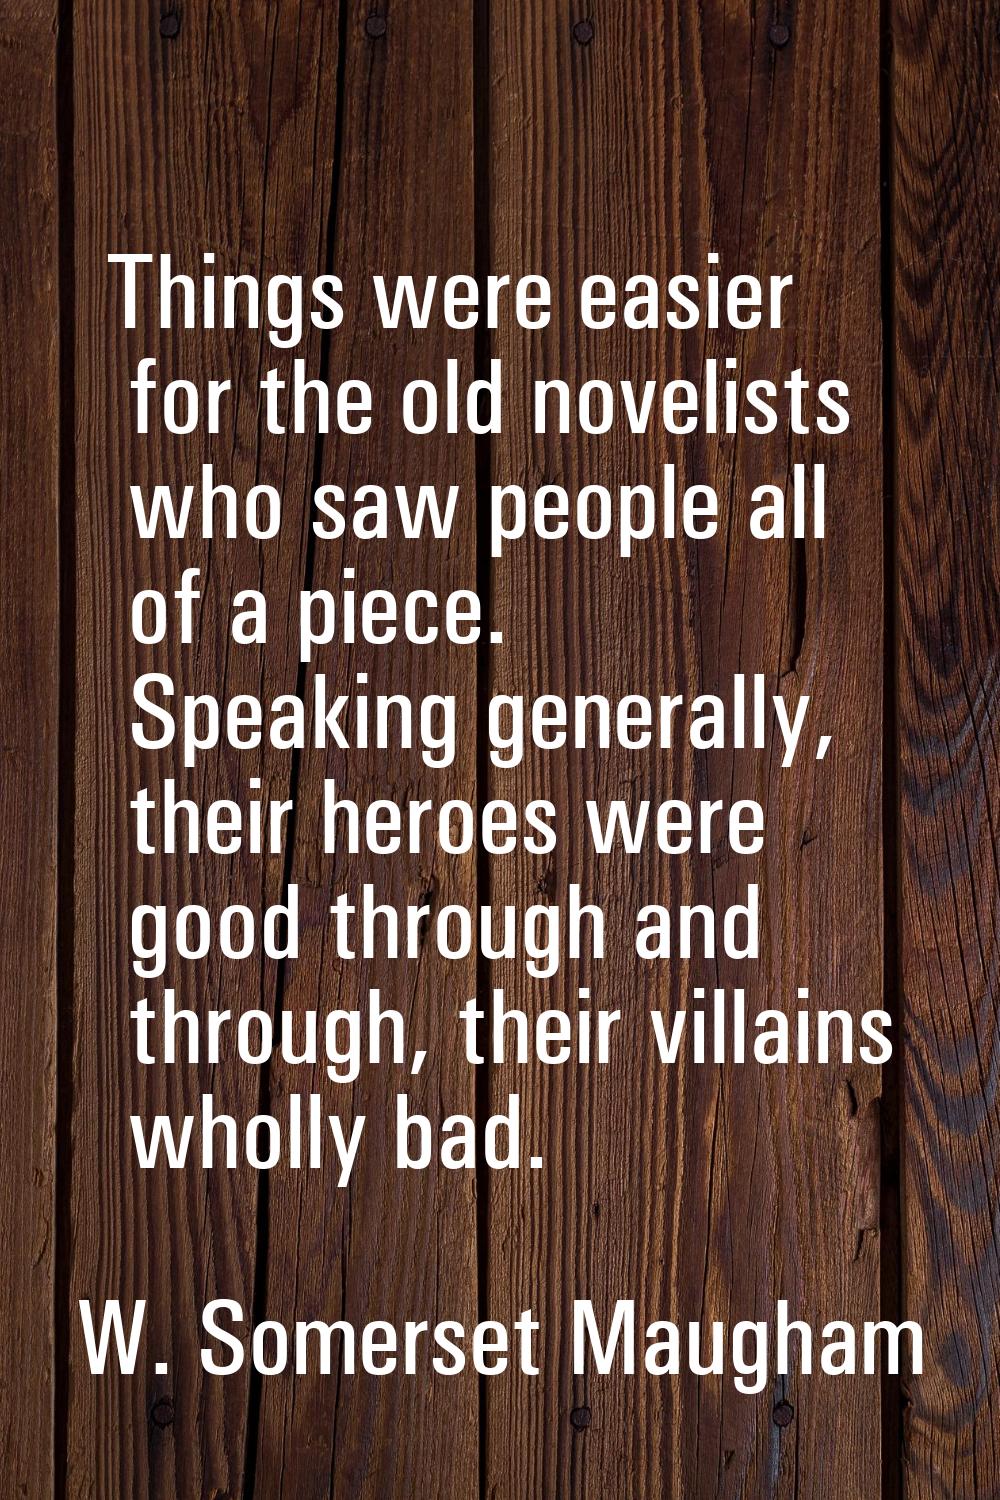 Things were easier for the old novelists who saw people all of a piece. Speaking generally, their h